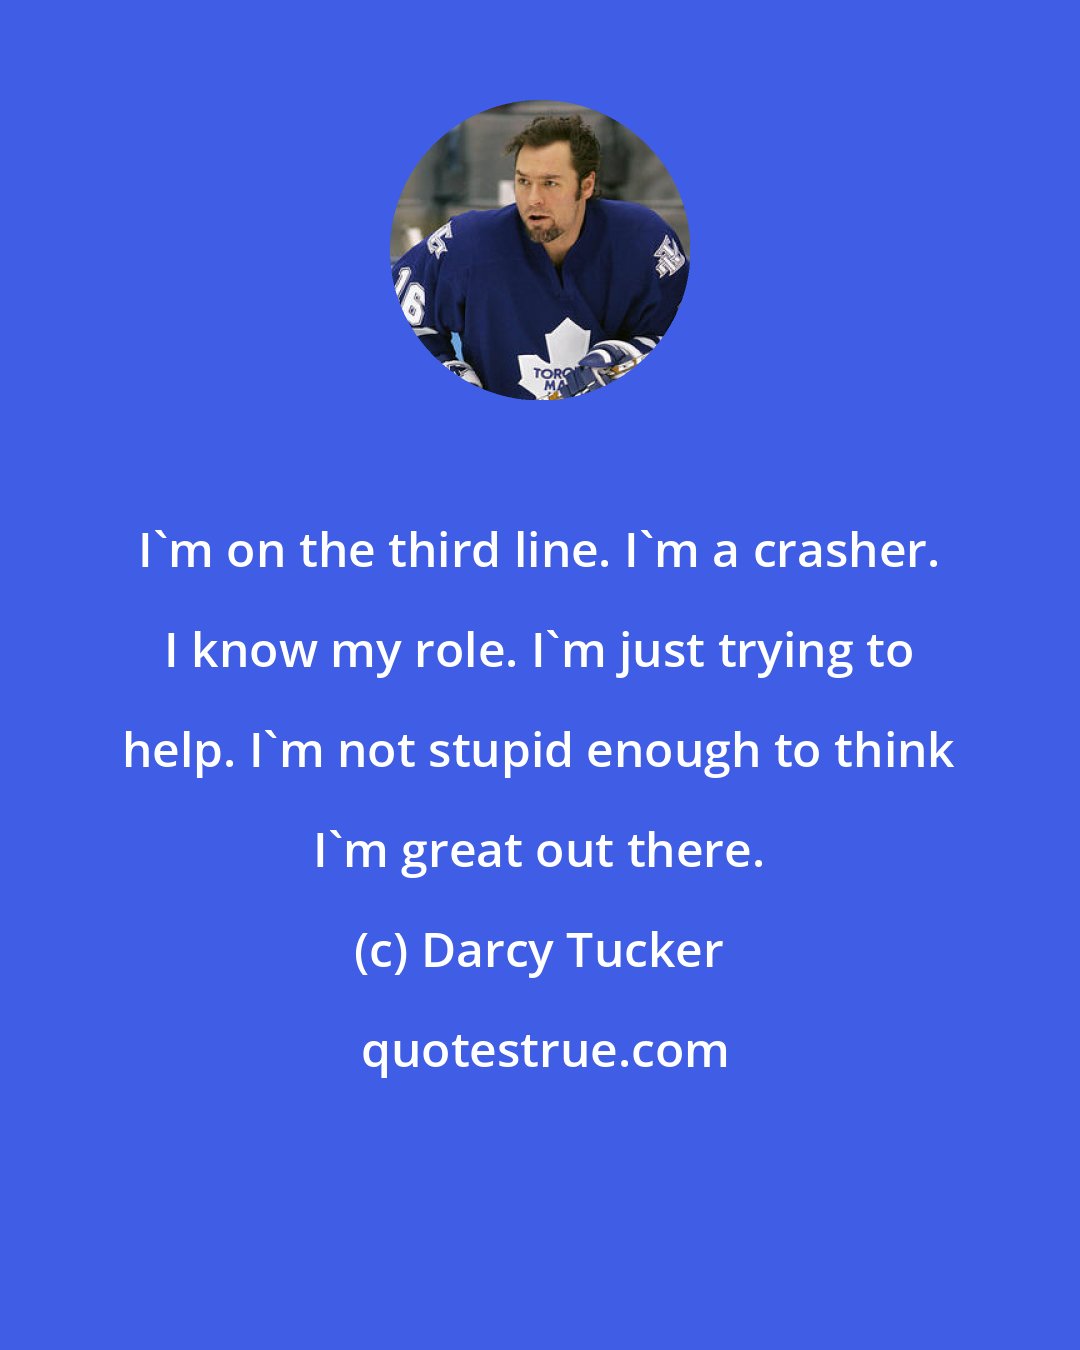 Darcy Tucker: I'm on the third line. I'm a crasher. I know my role. I'm just trying to help. I'm not stupid enough to think I'm great out there.